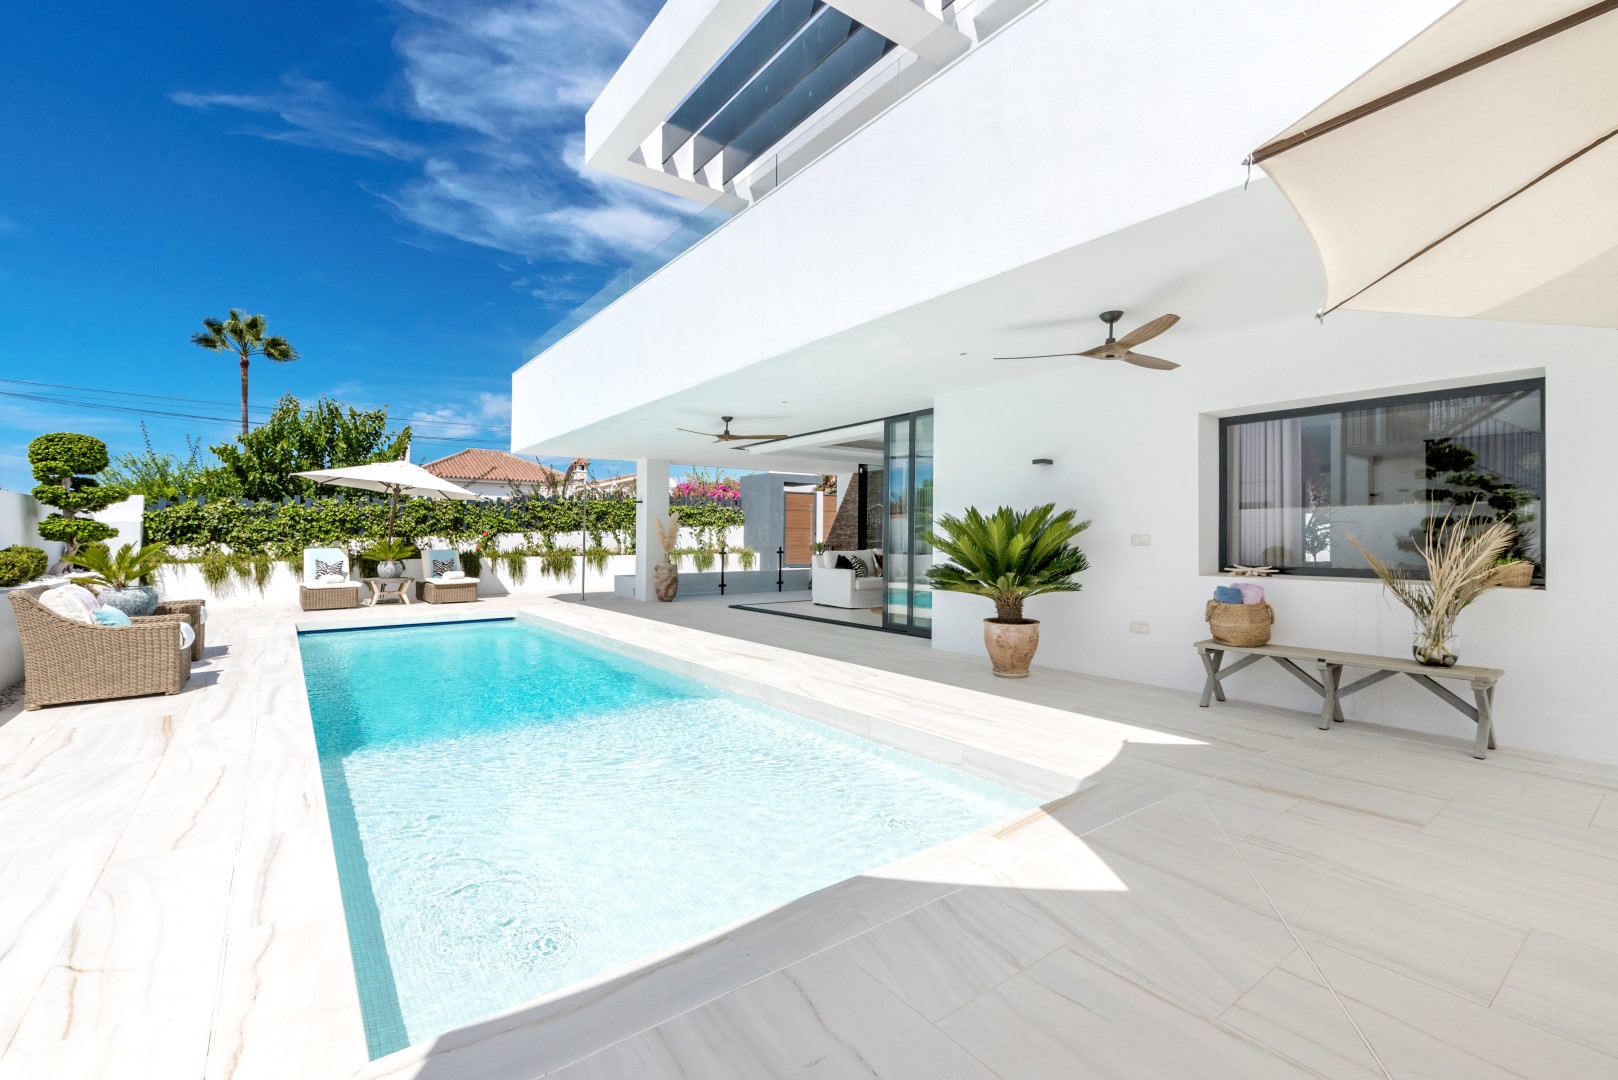 Property Image 1 - Chic villa with modern decor and private pool